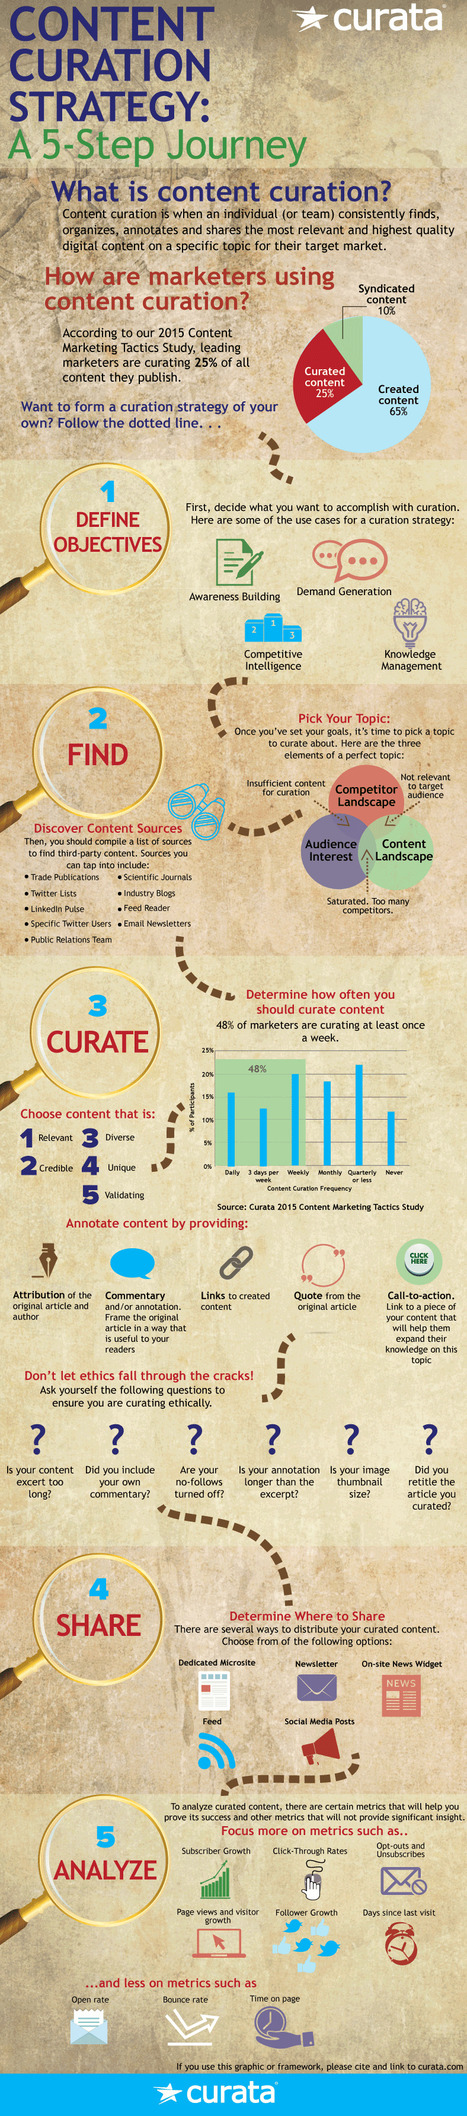 Content Curation Strategy: A 5-Step Journey #Infographic #contentcuration #marketing | MarketingHits | Scoop.it